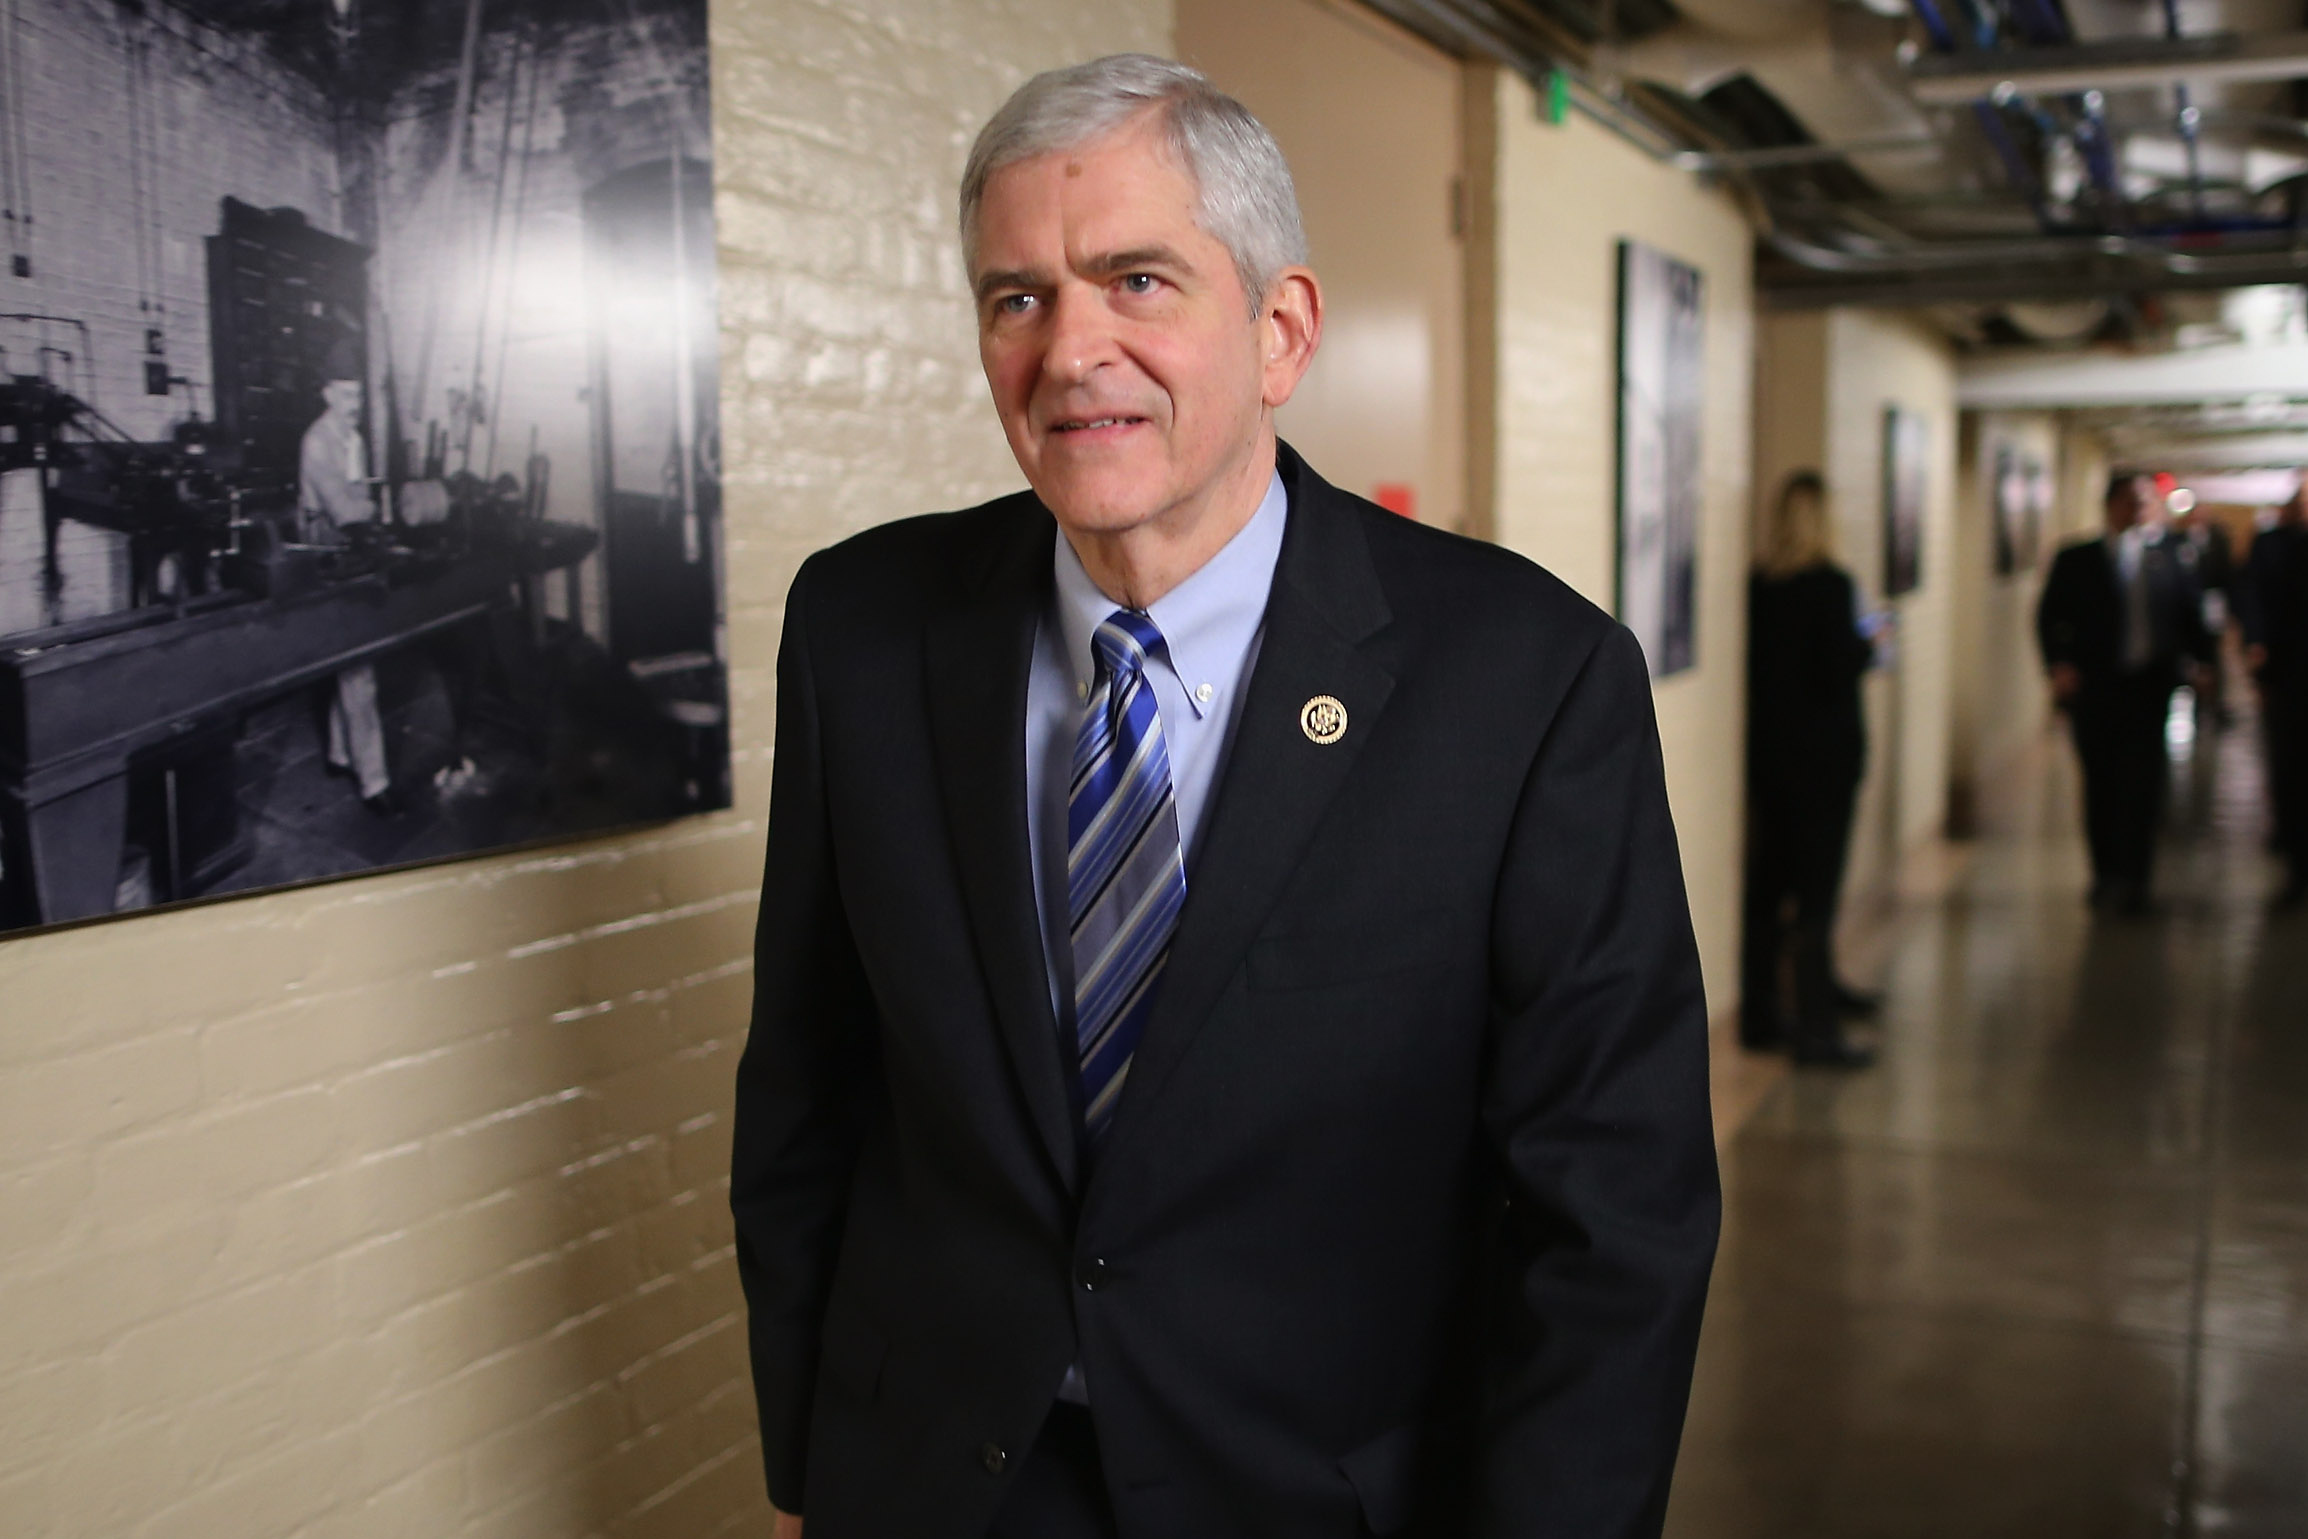 Rep. Daniel Webster, R-Fla., was endorsed for House speaker by the conservative Freedom Caucus. As speaker of the state legislature in Florida, Webster gave the members more of a say, which is what conservatives in Congress want from their next leader. (Chip Somodevilla/Getty Images)